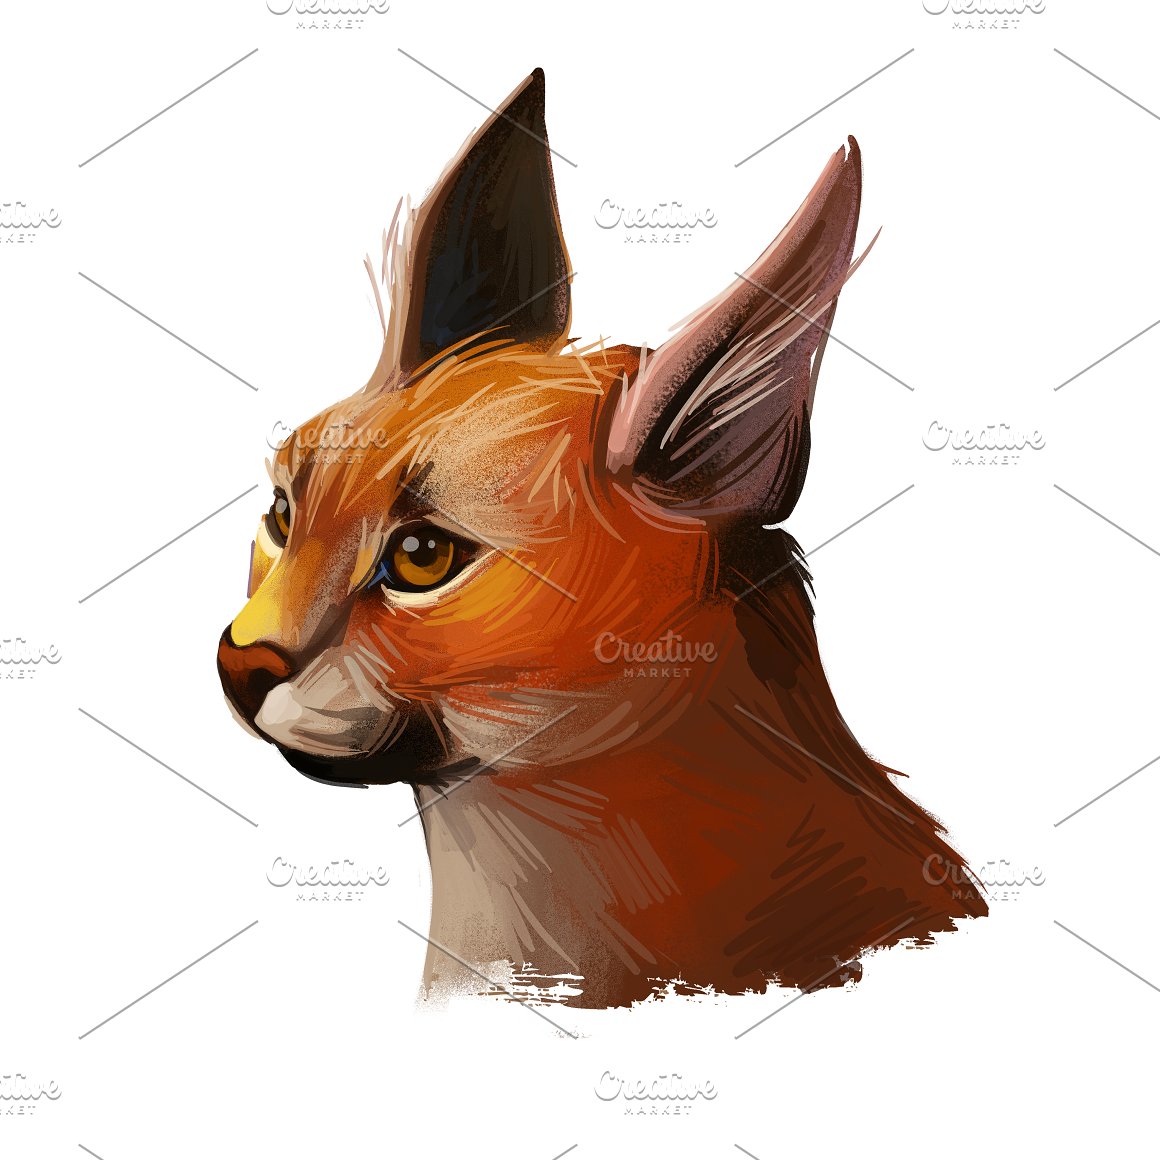 Image of a caracal.